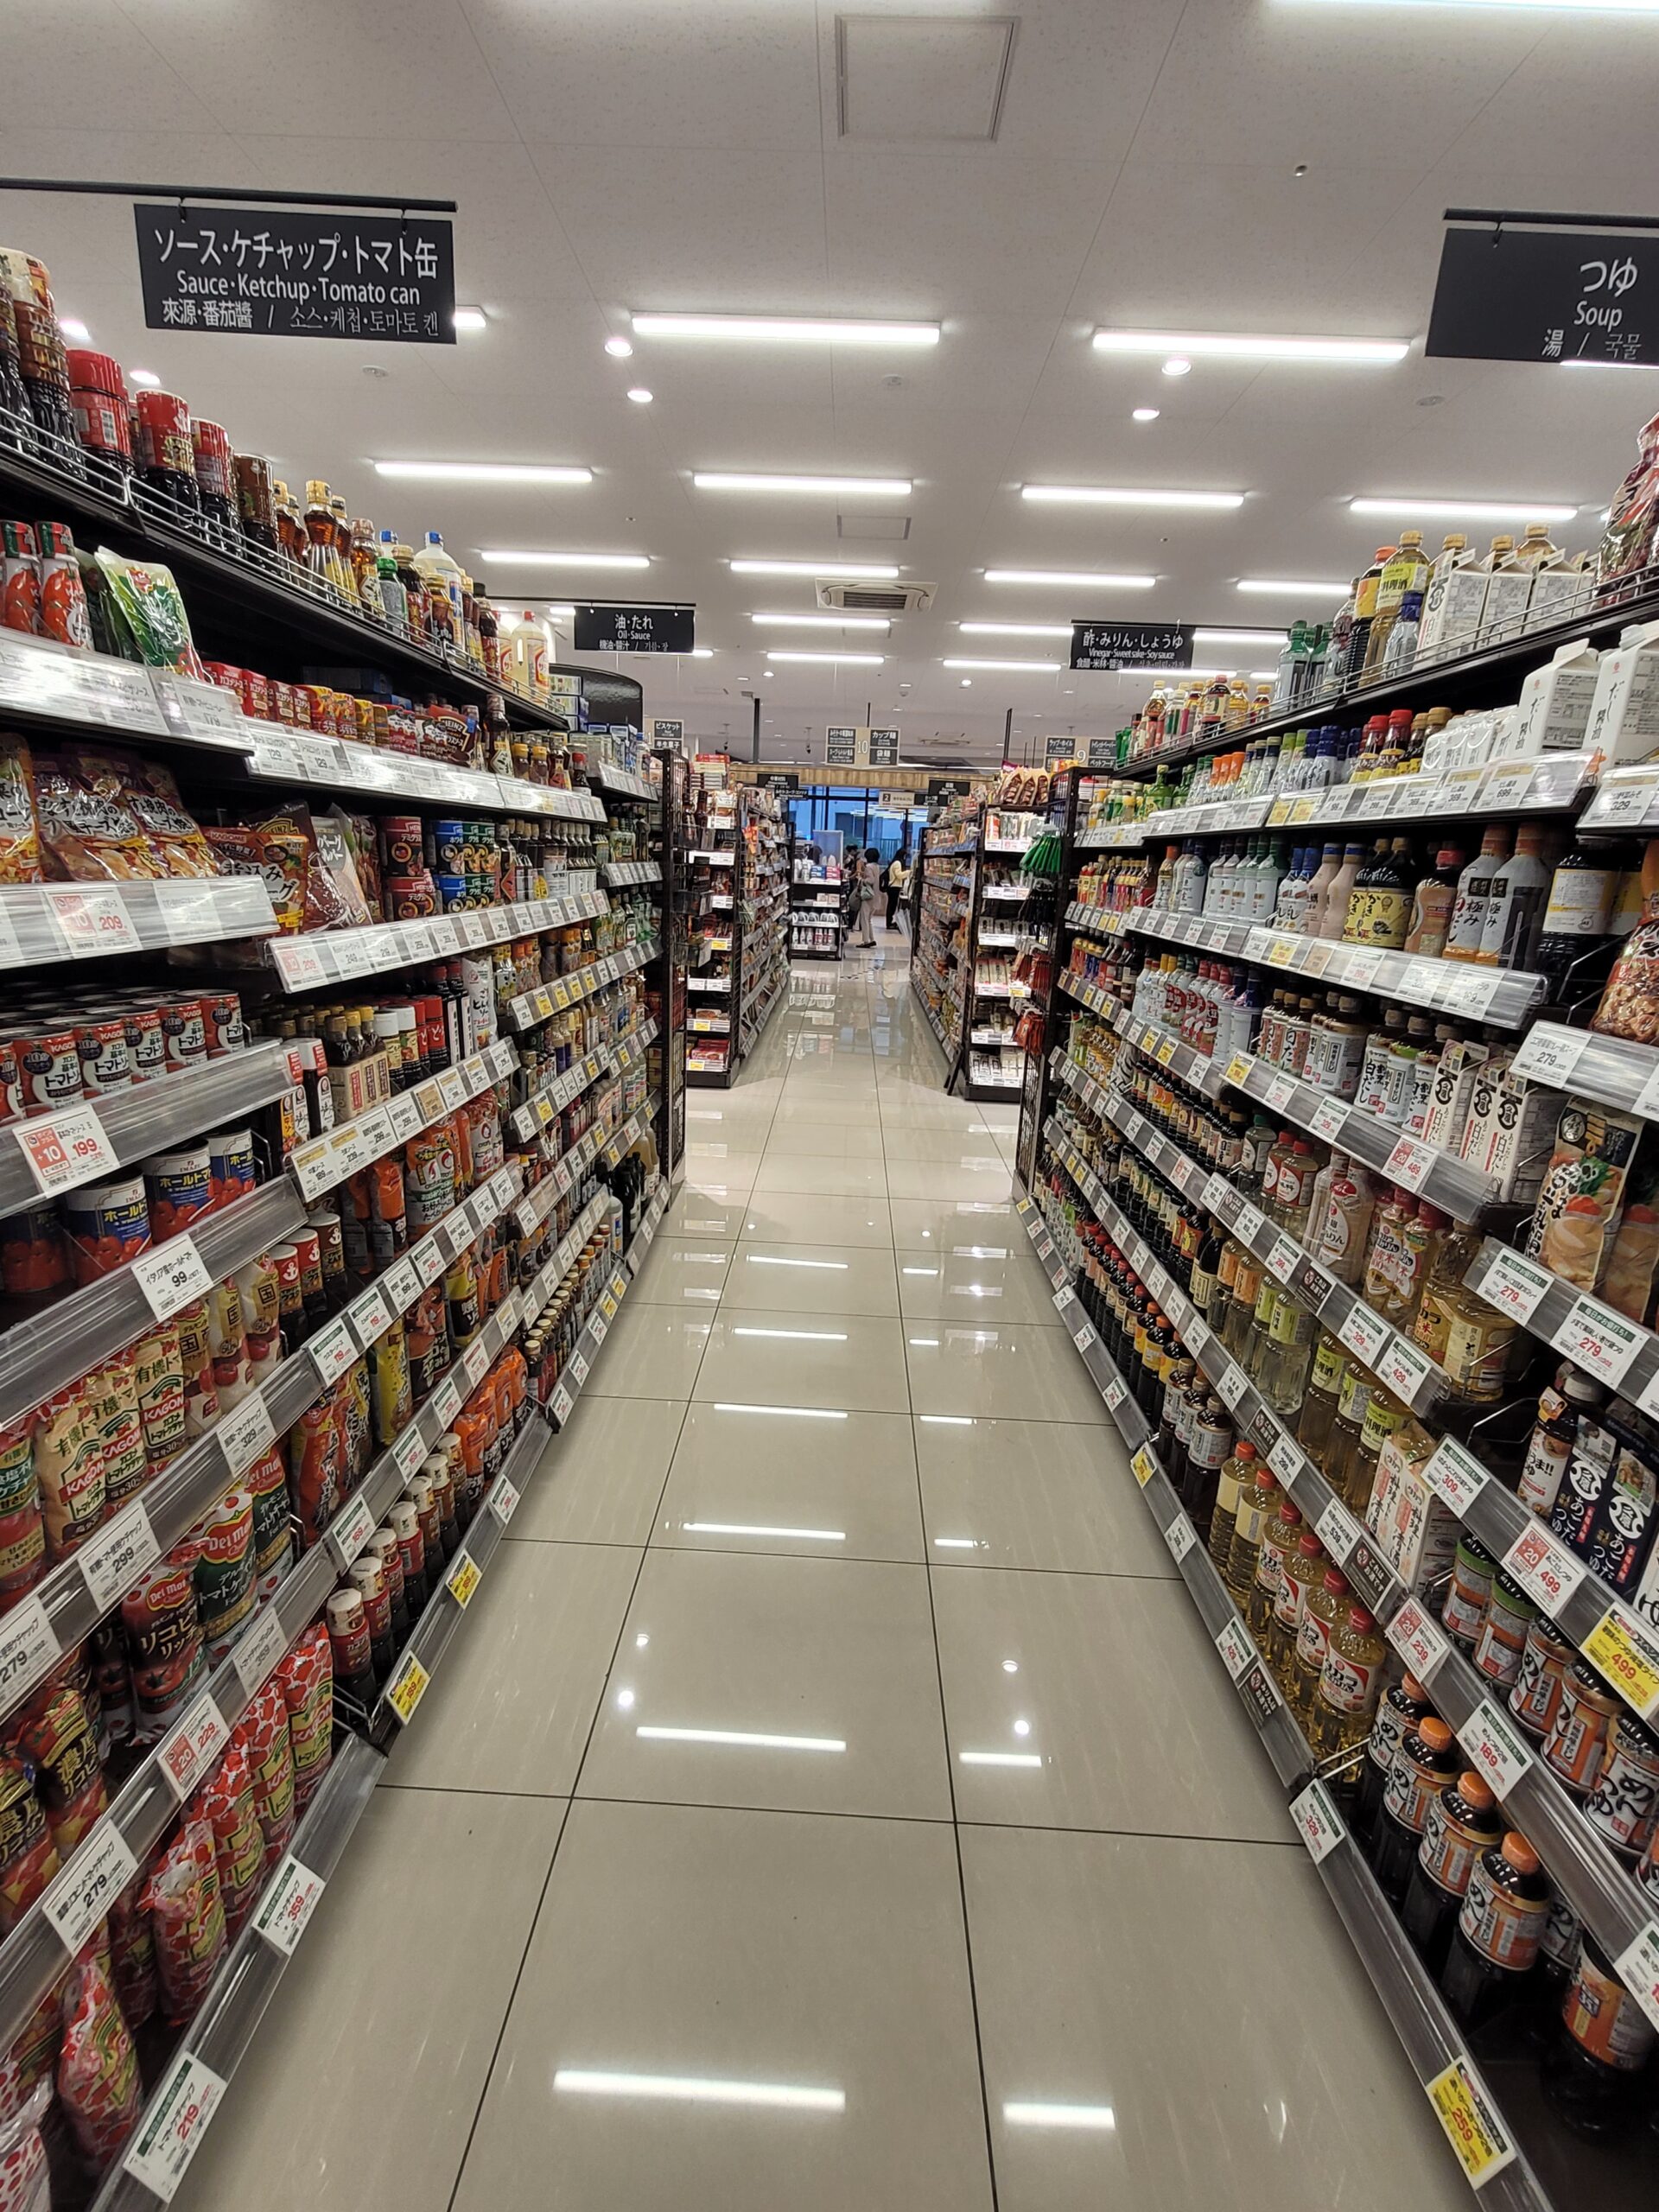 What’s it like inside a Japanese supermarket? A review of Izumiya